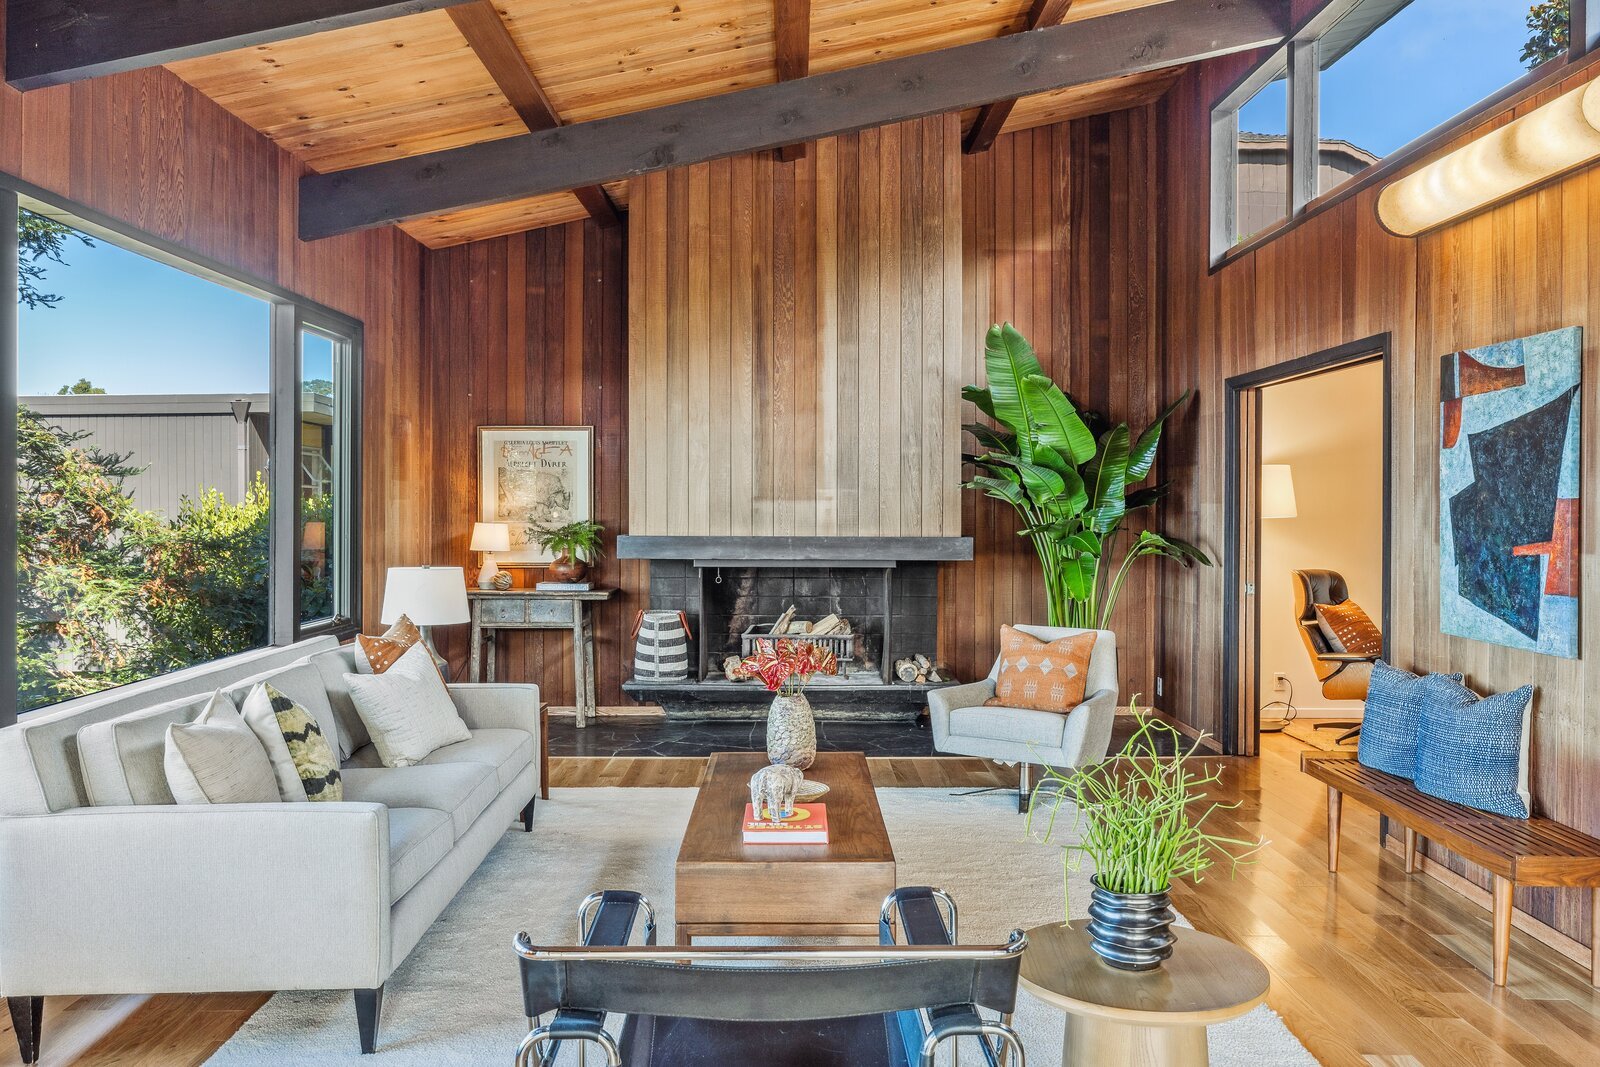 A Hillside Midcentury With a Wood-Wrapped Interior Surfaces in the East Bay for $2M